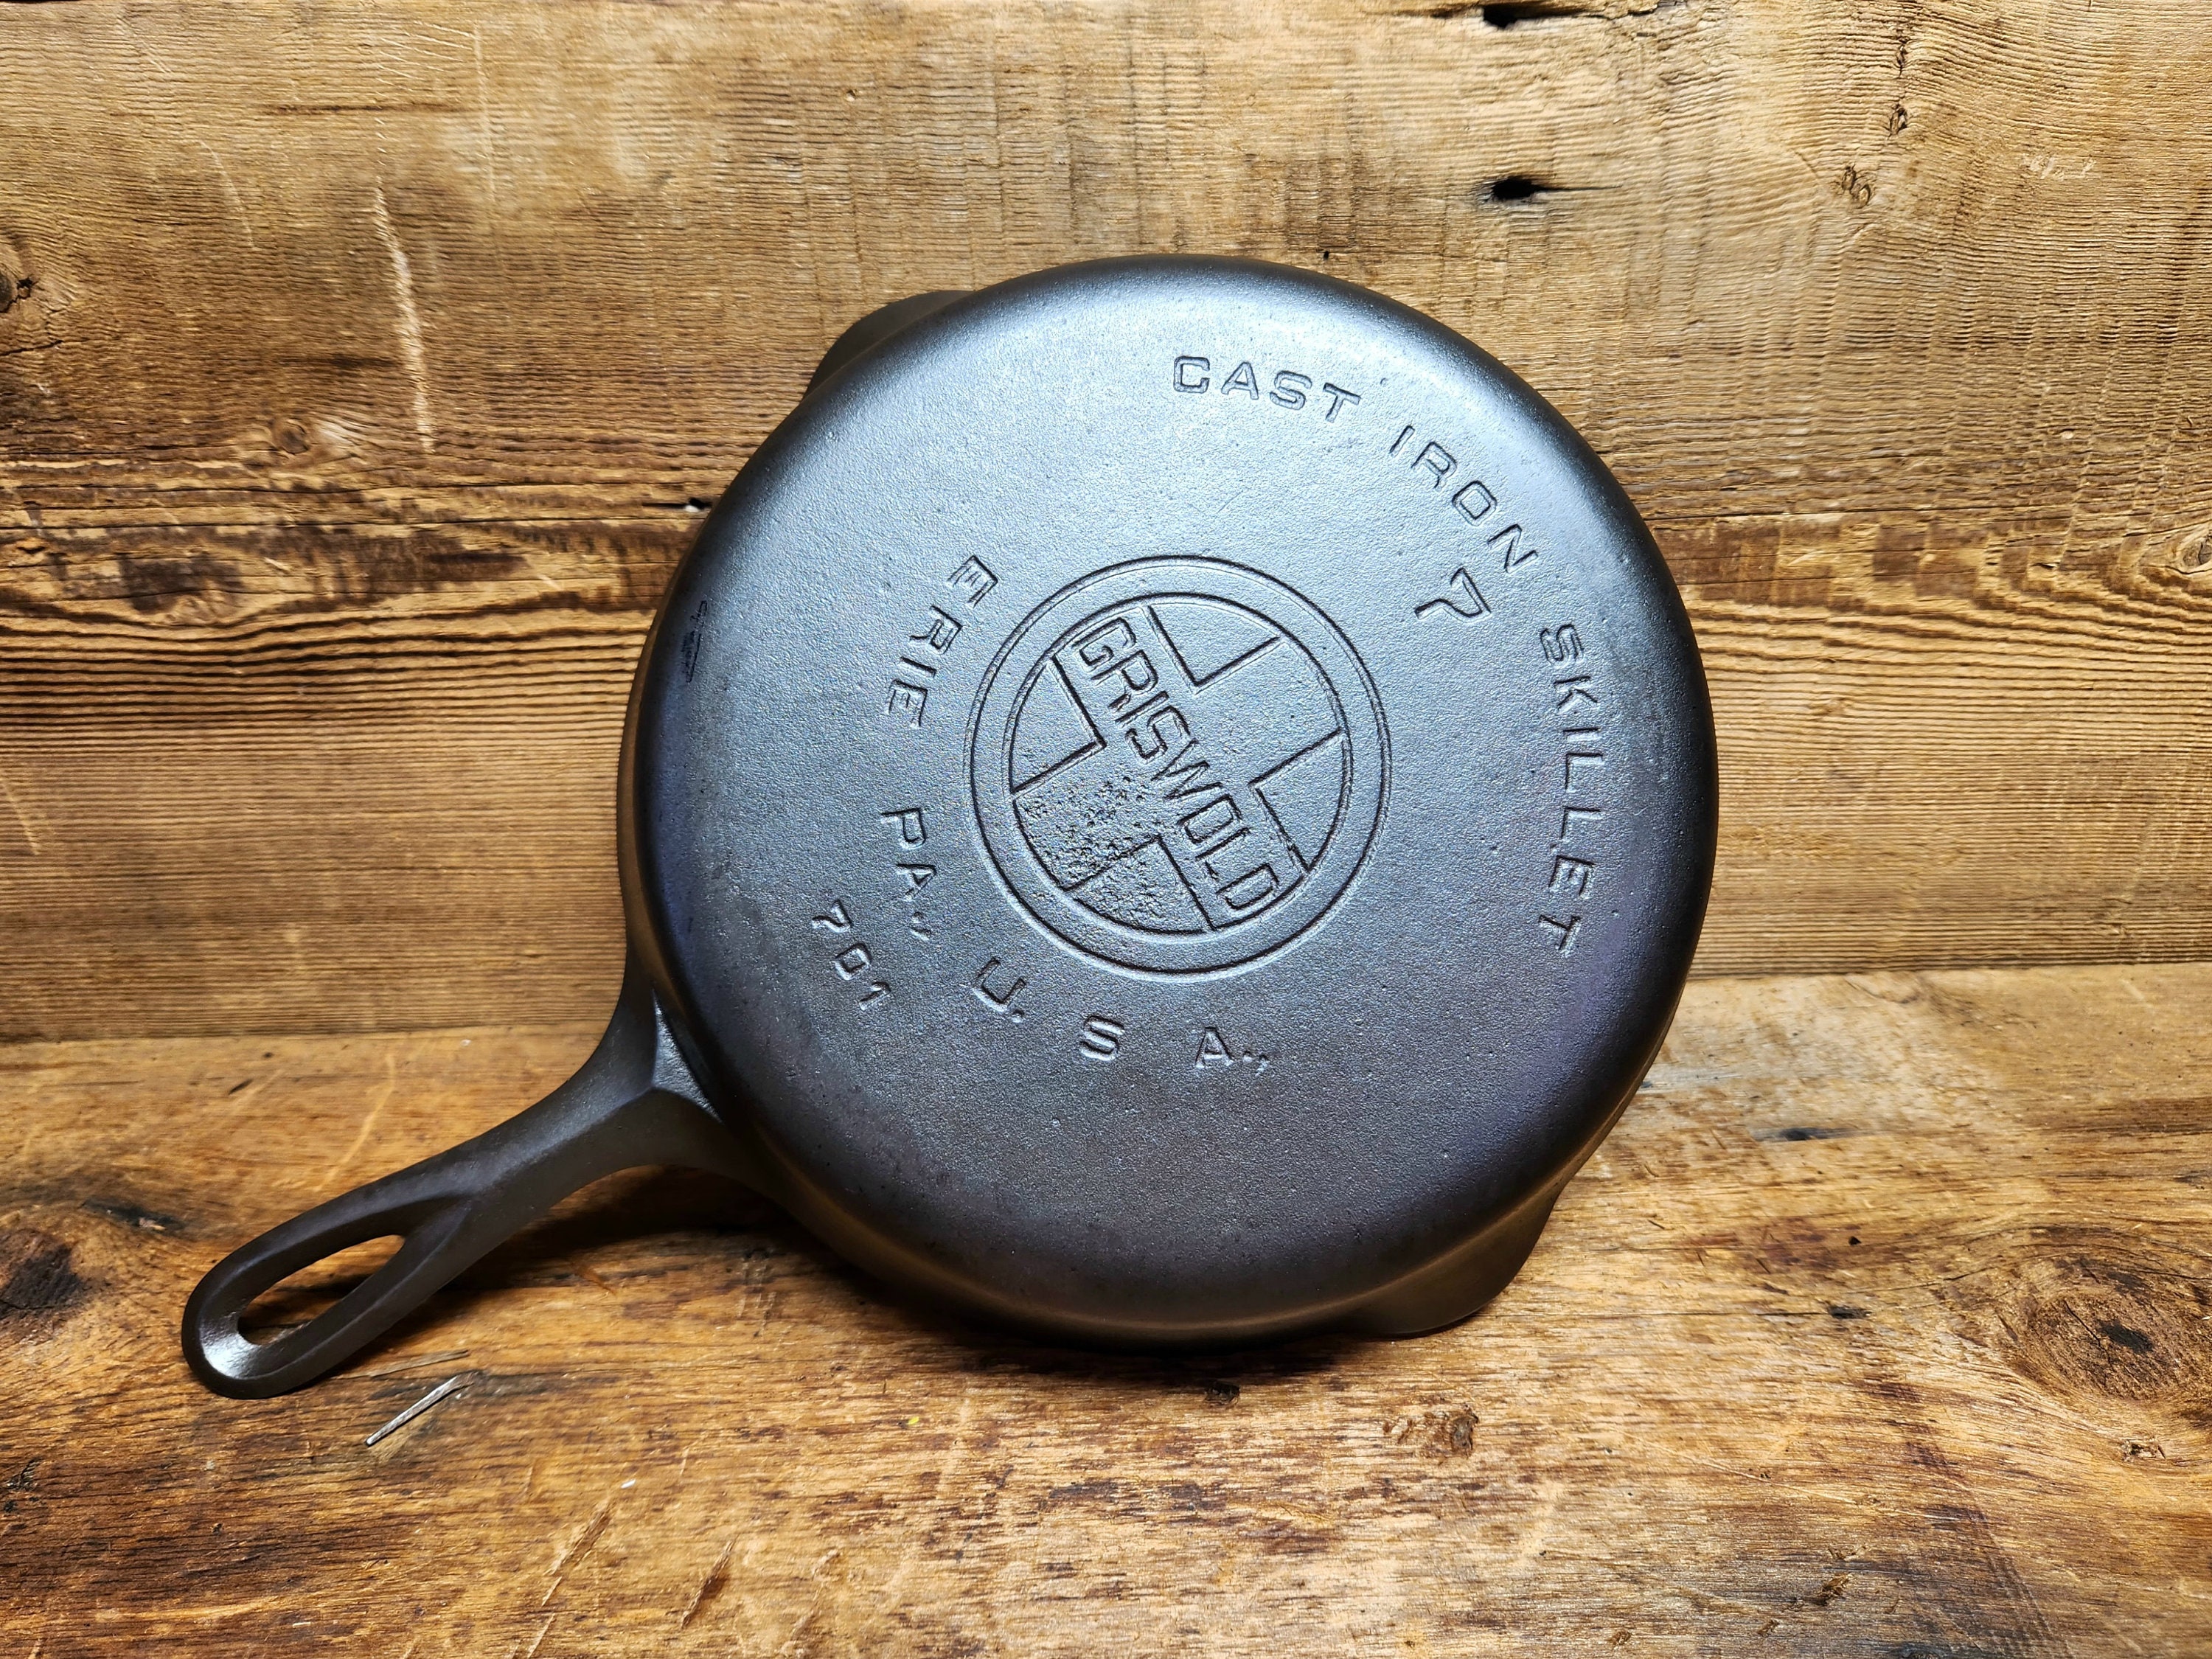 Griswold #7 Cast Iron Skillet with Large Block Logo and Smooth